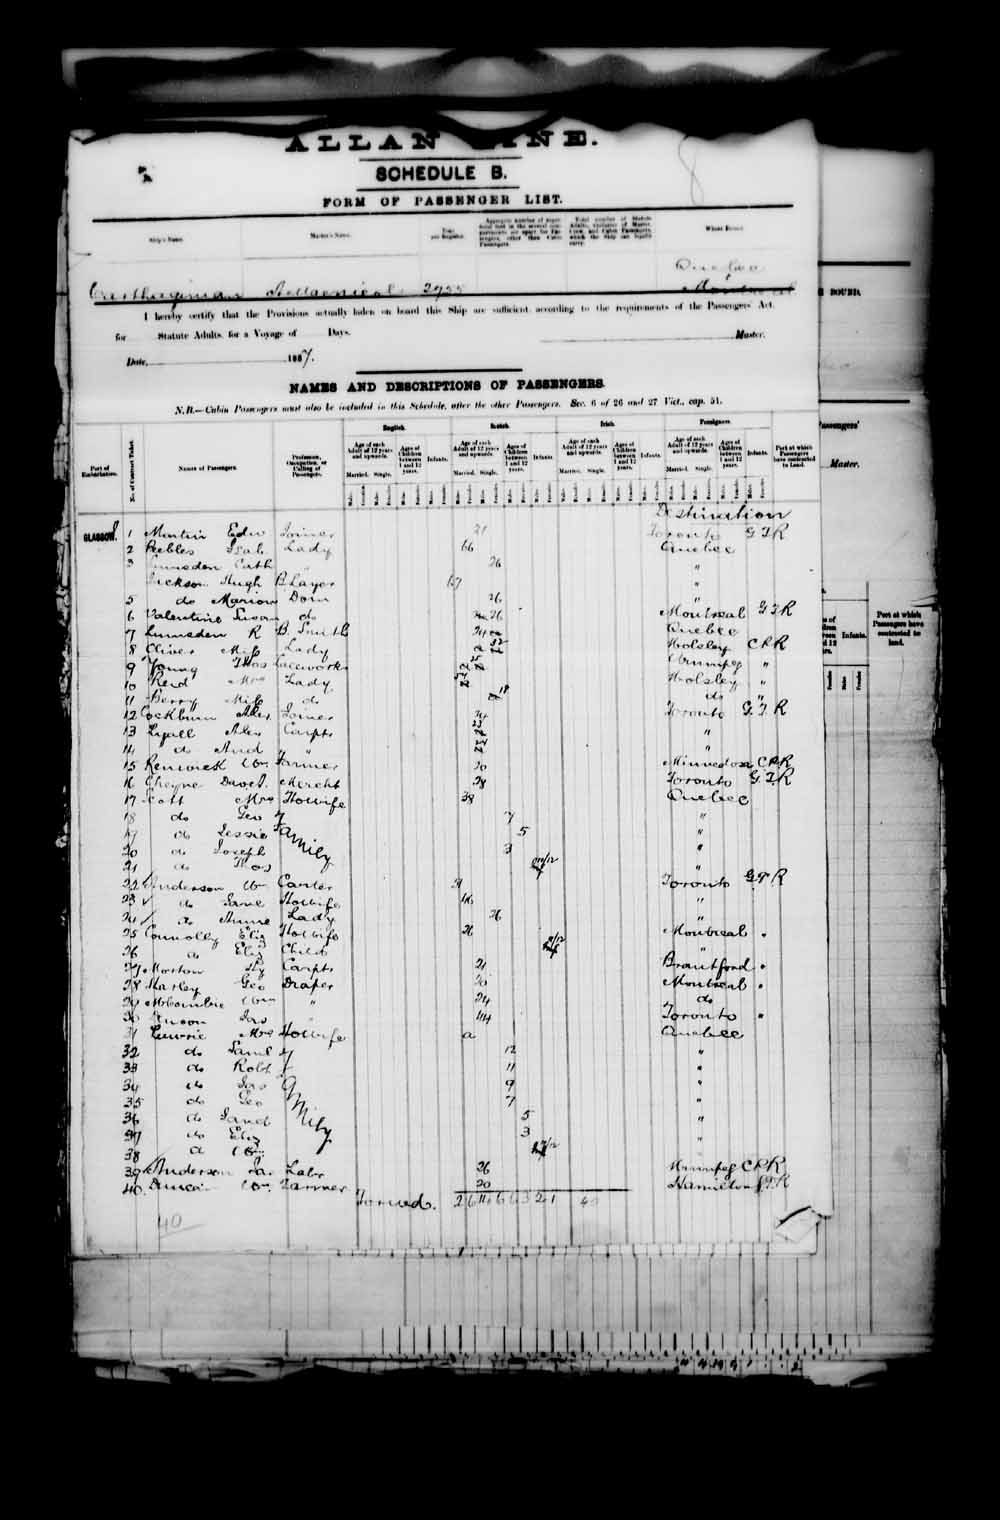 Digitized page of Passenger Lists for Image No.: e003546728